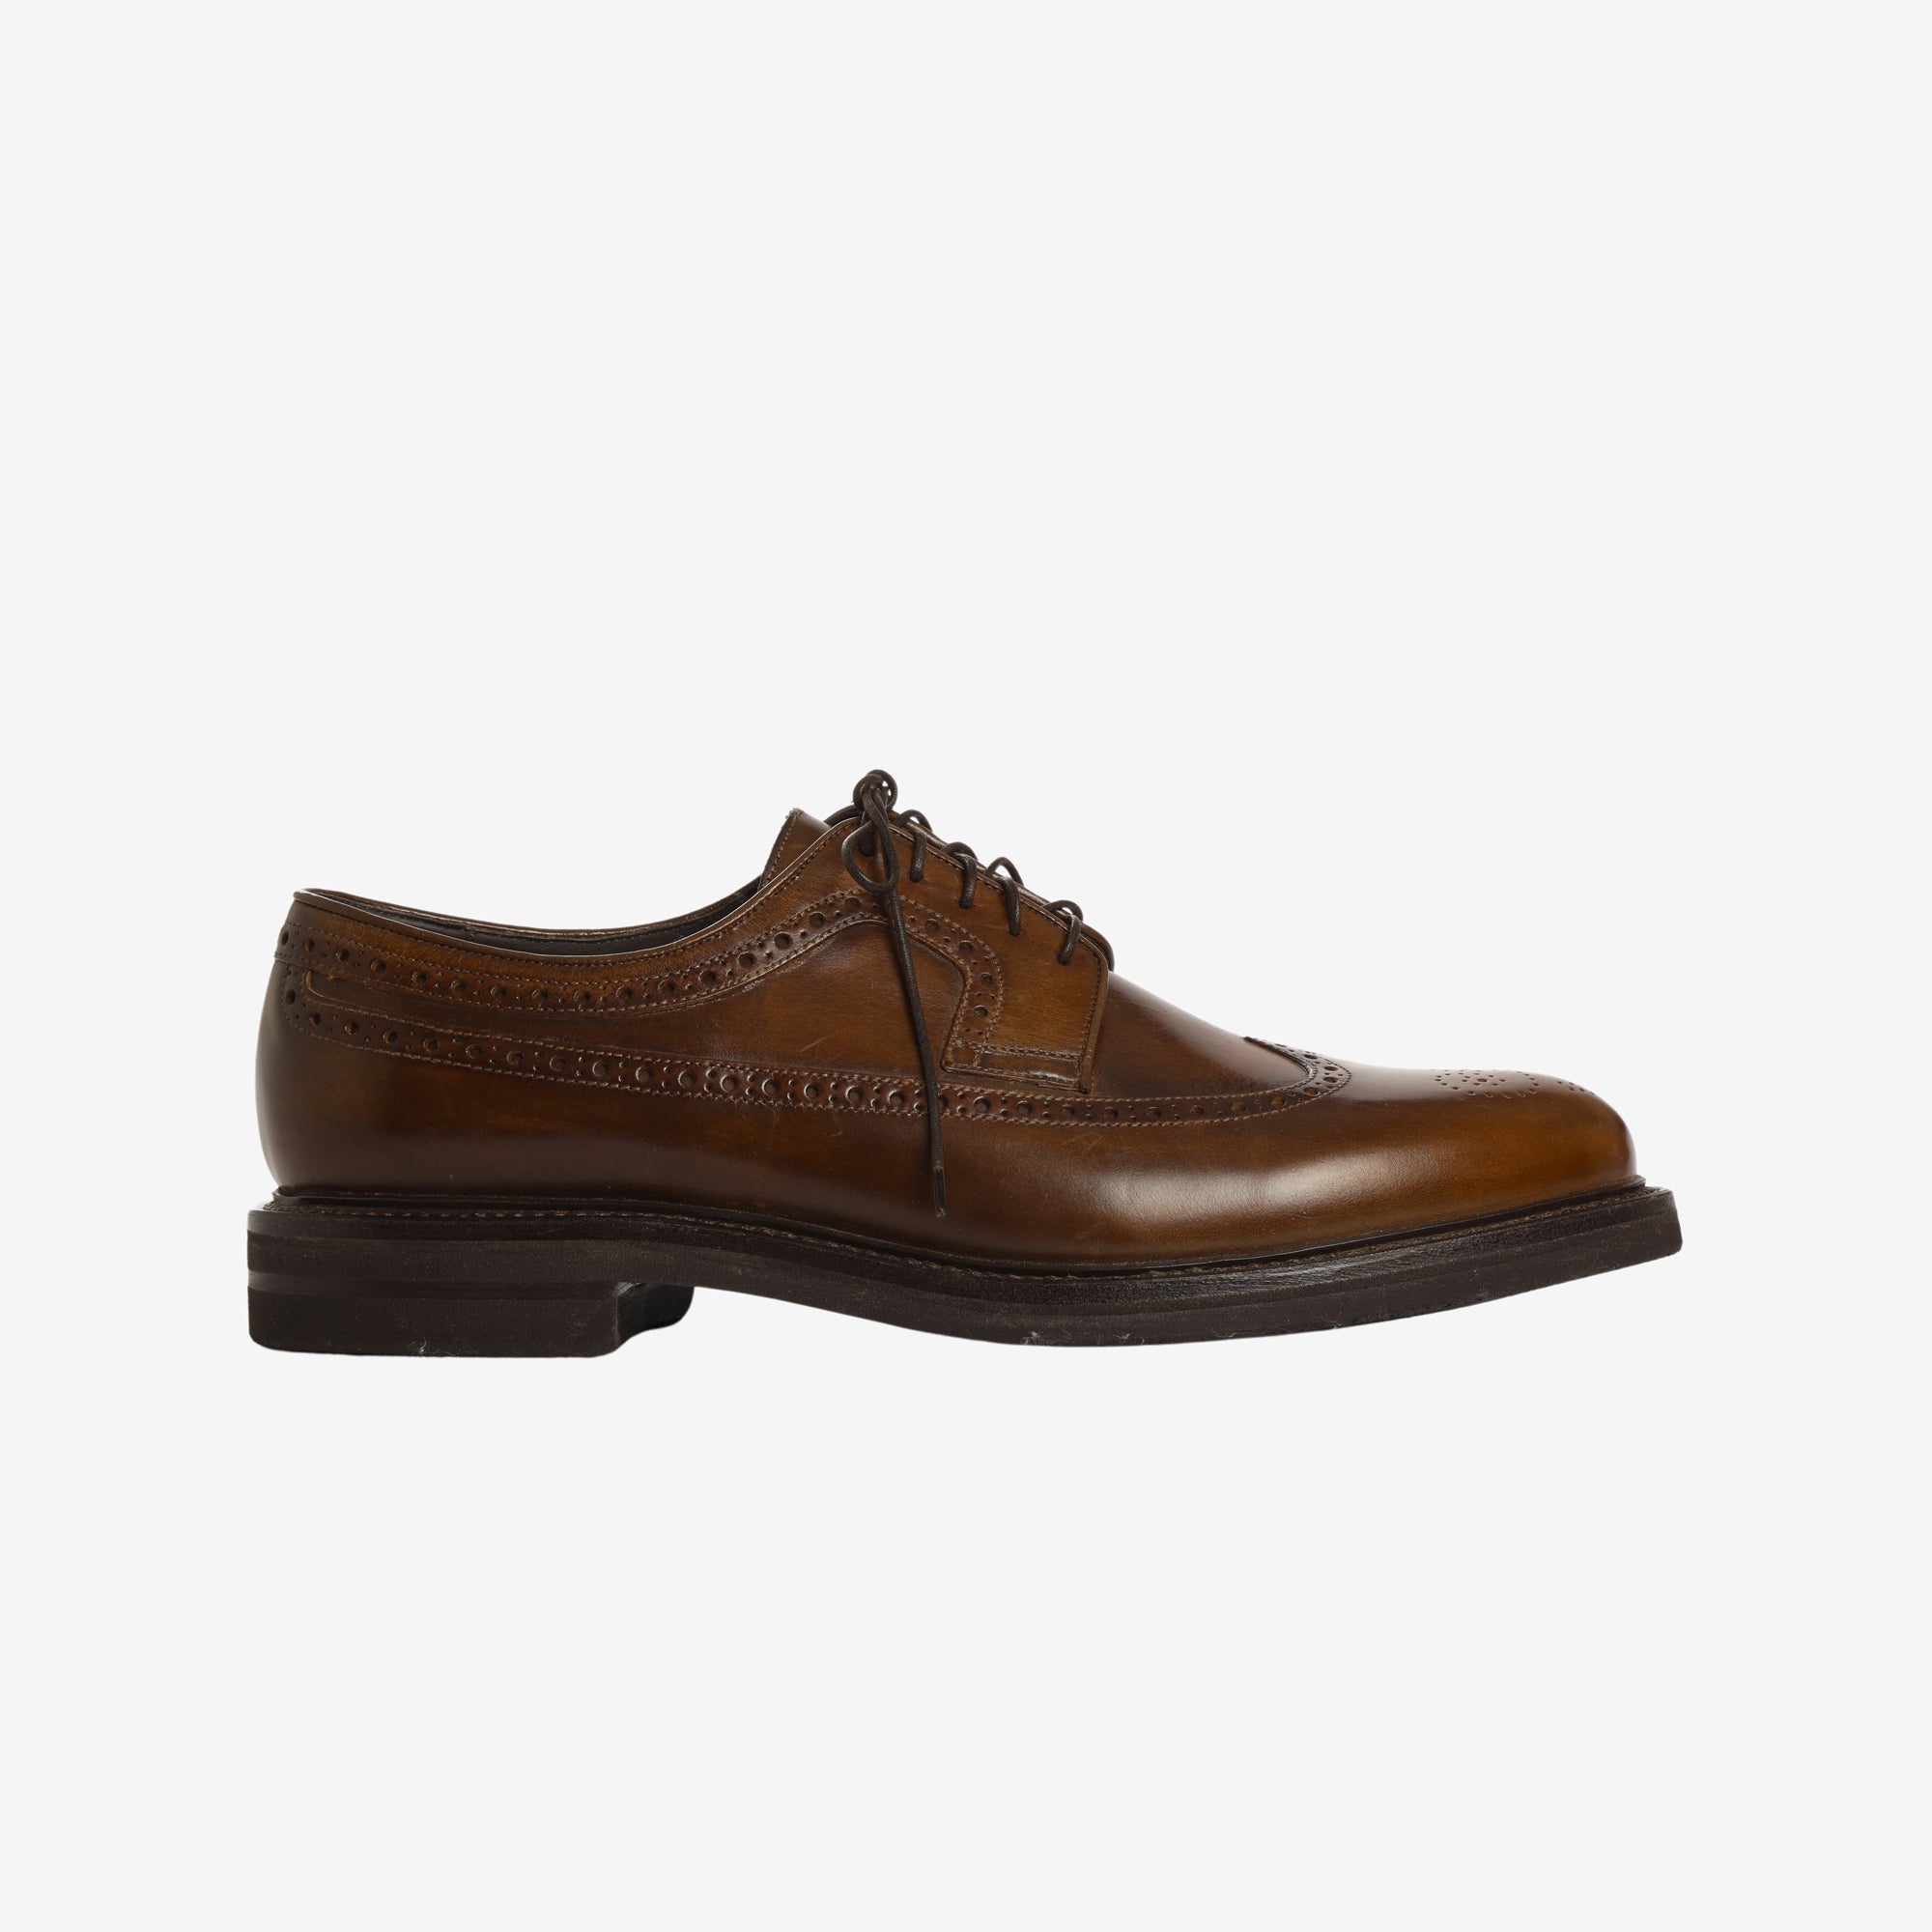 Leather Derby Brogues